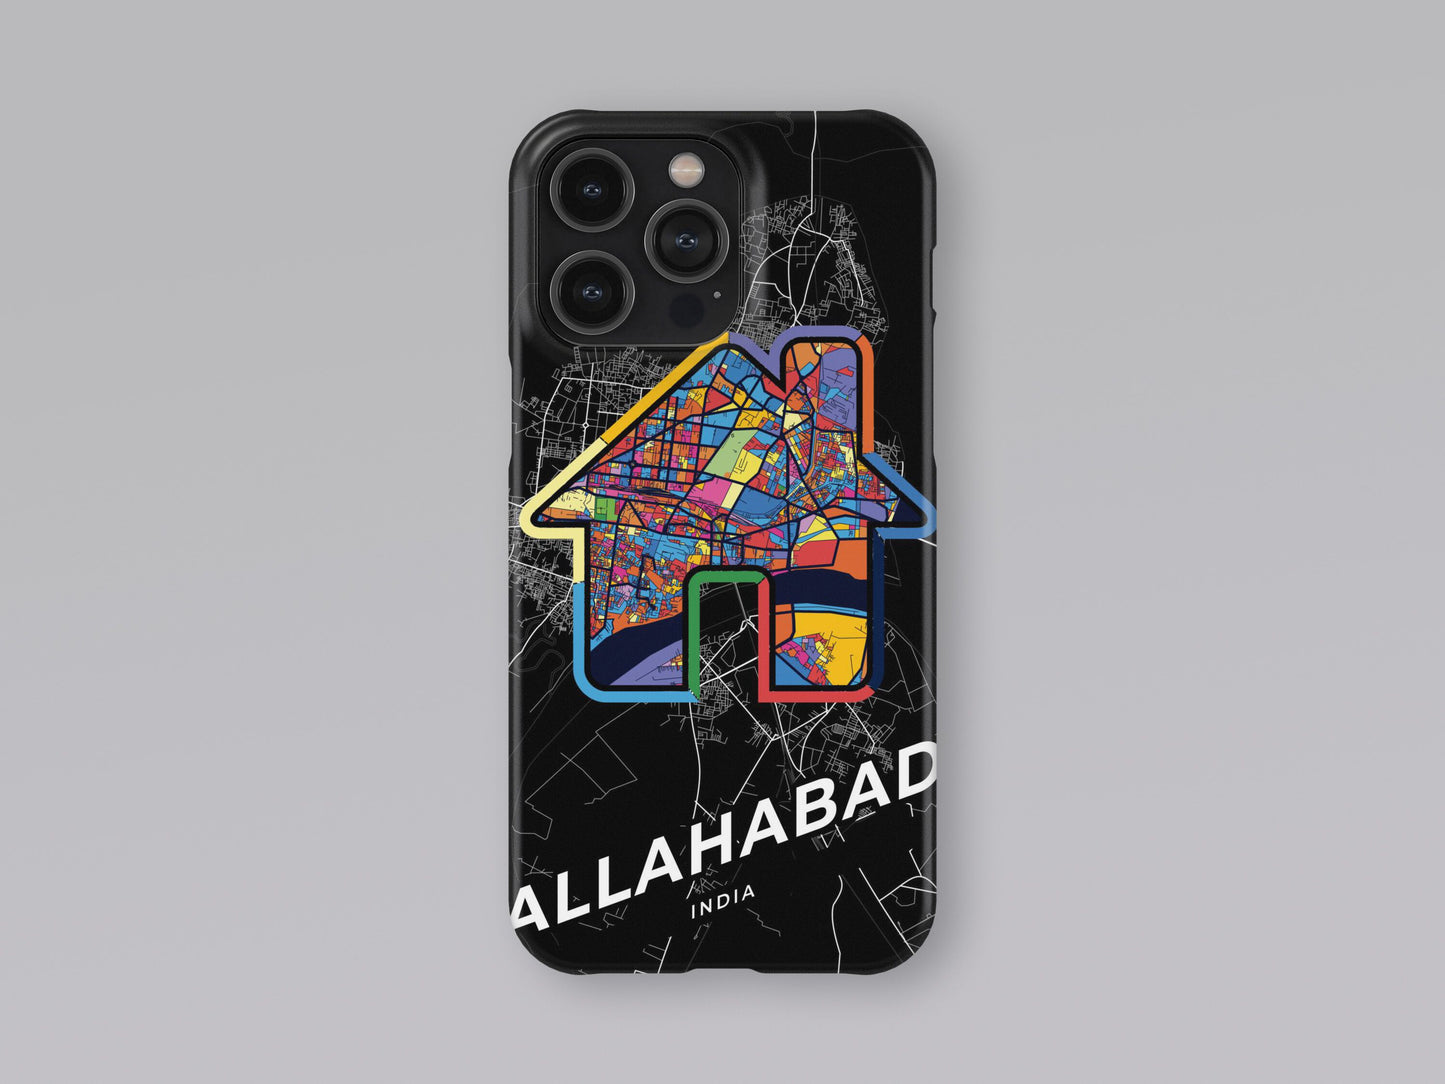 Allahabad India slim phone case with colorful icon. Birthday, wedding or housewarming gift. Couple match cases. 3